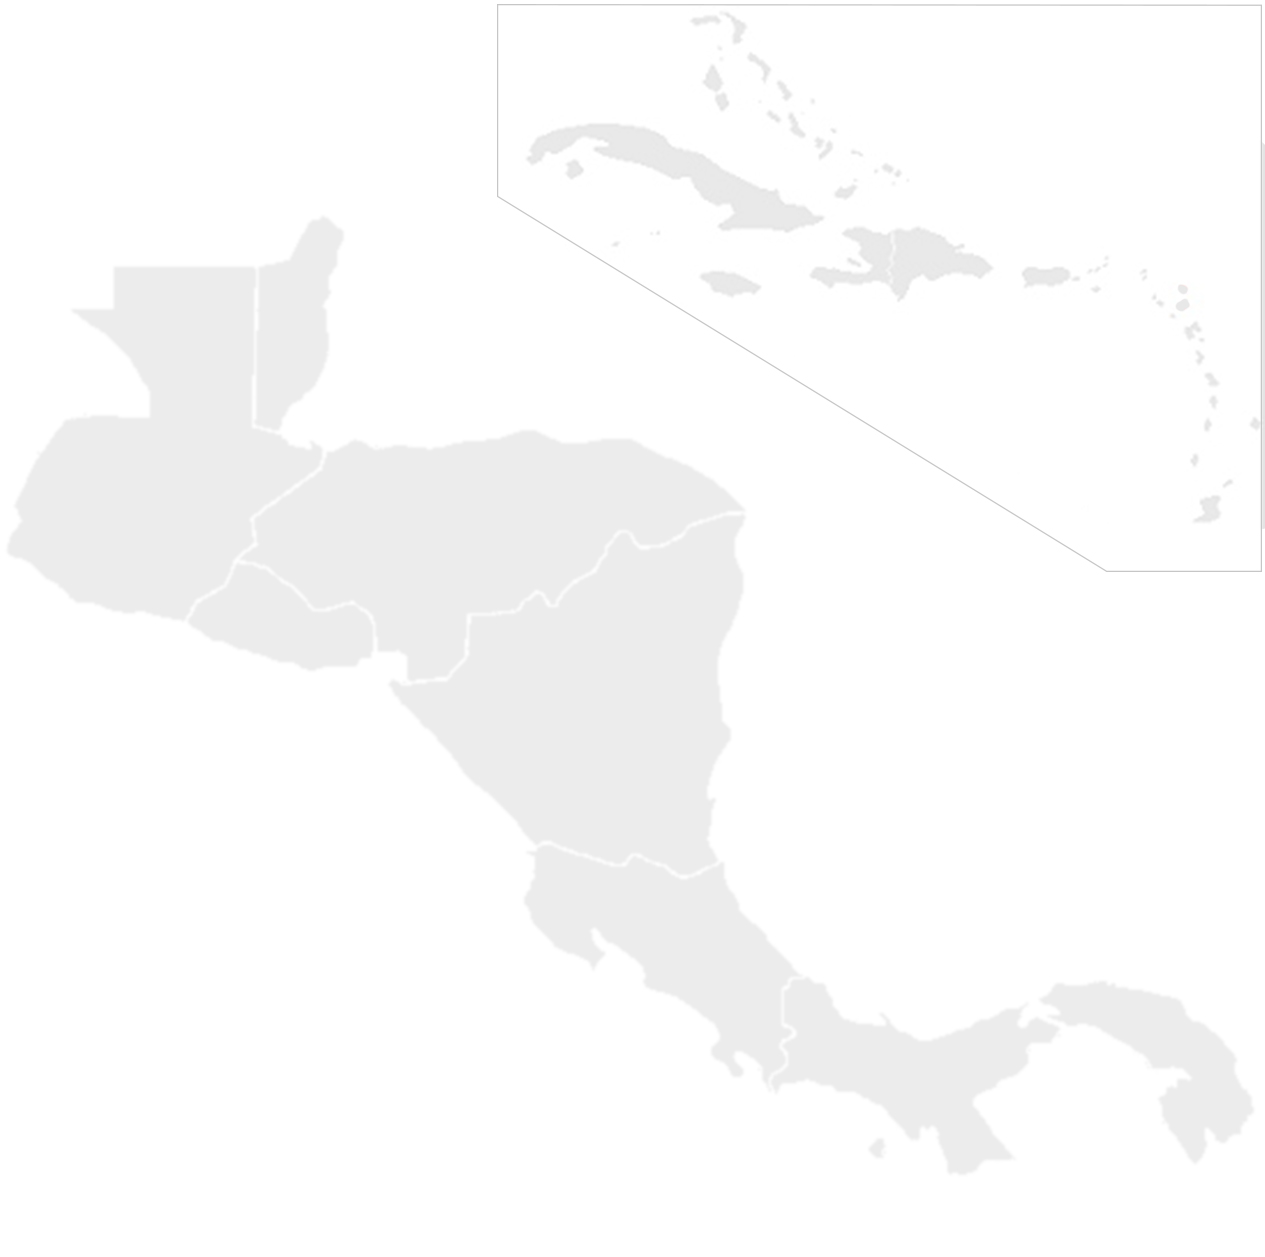 Gray map of Central America and the Caribbean